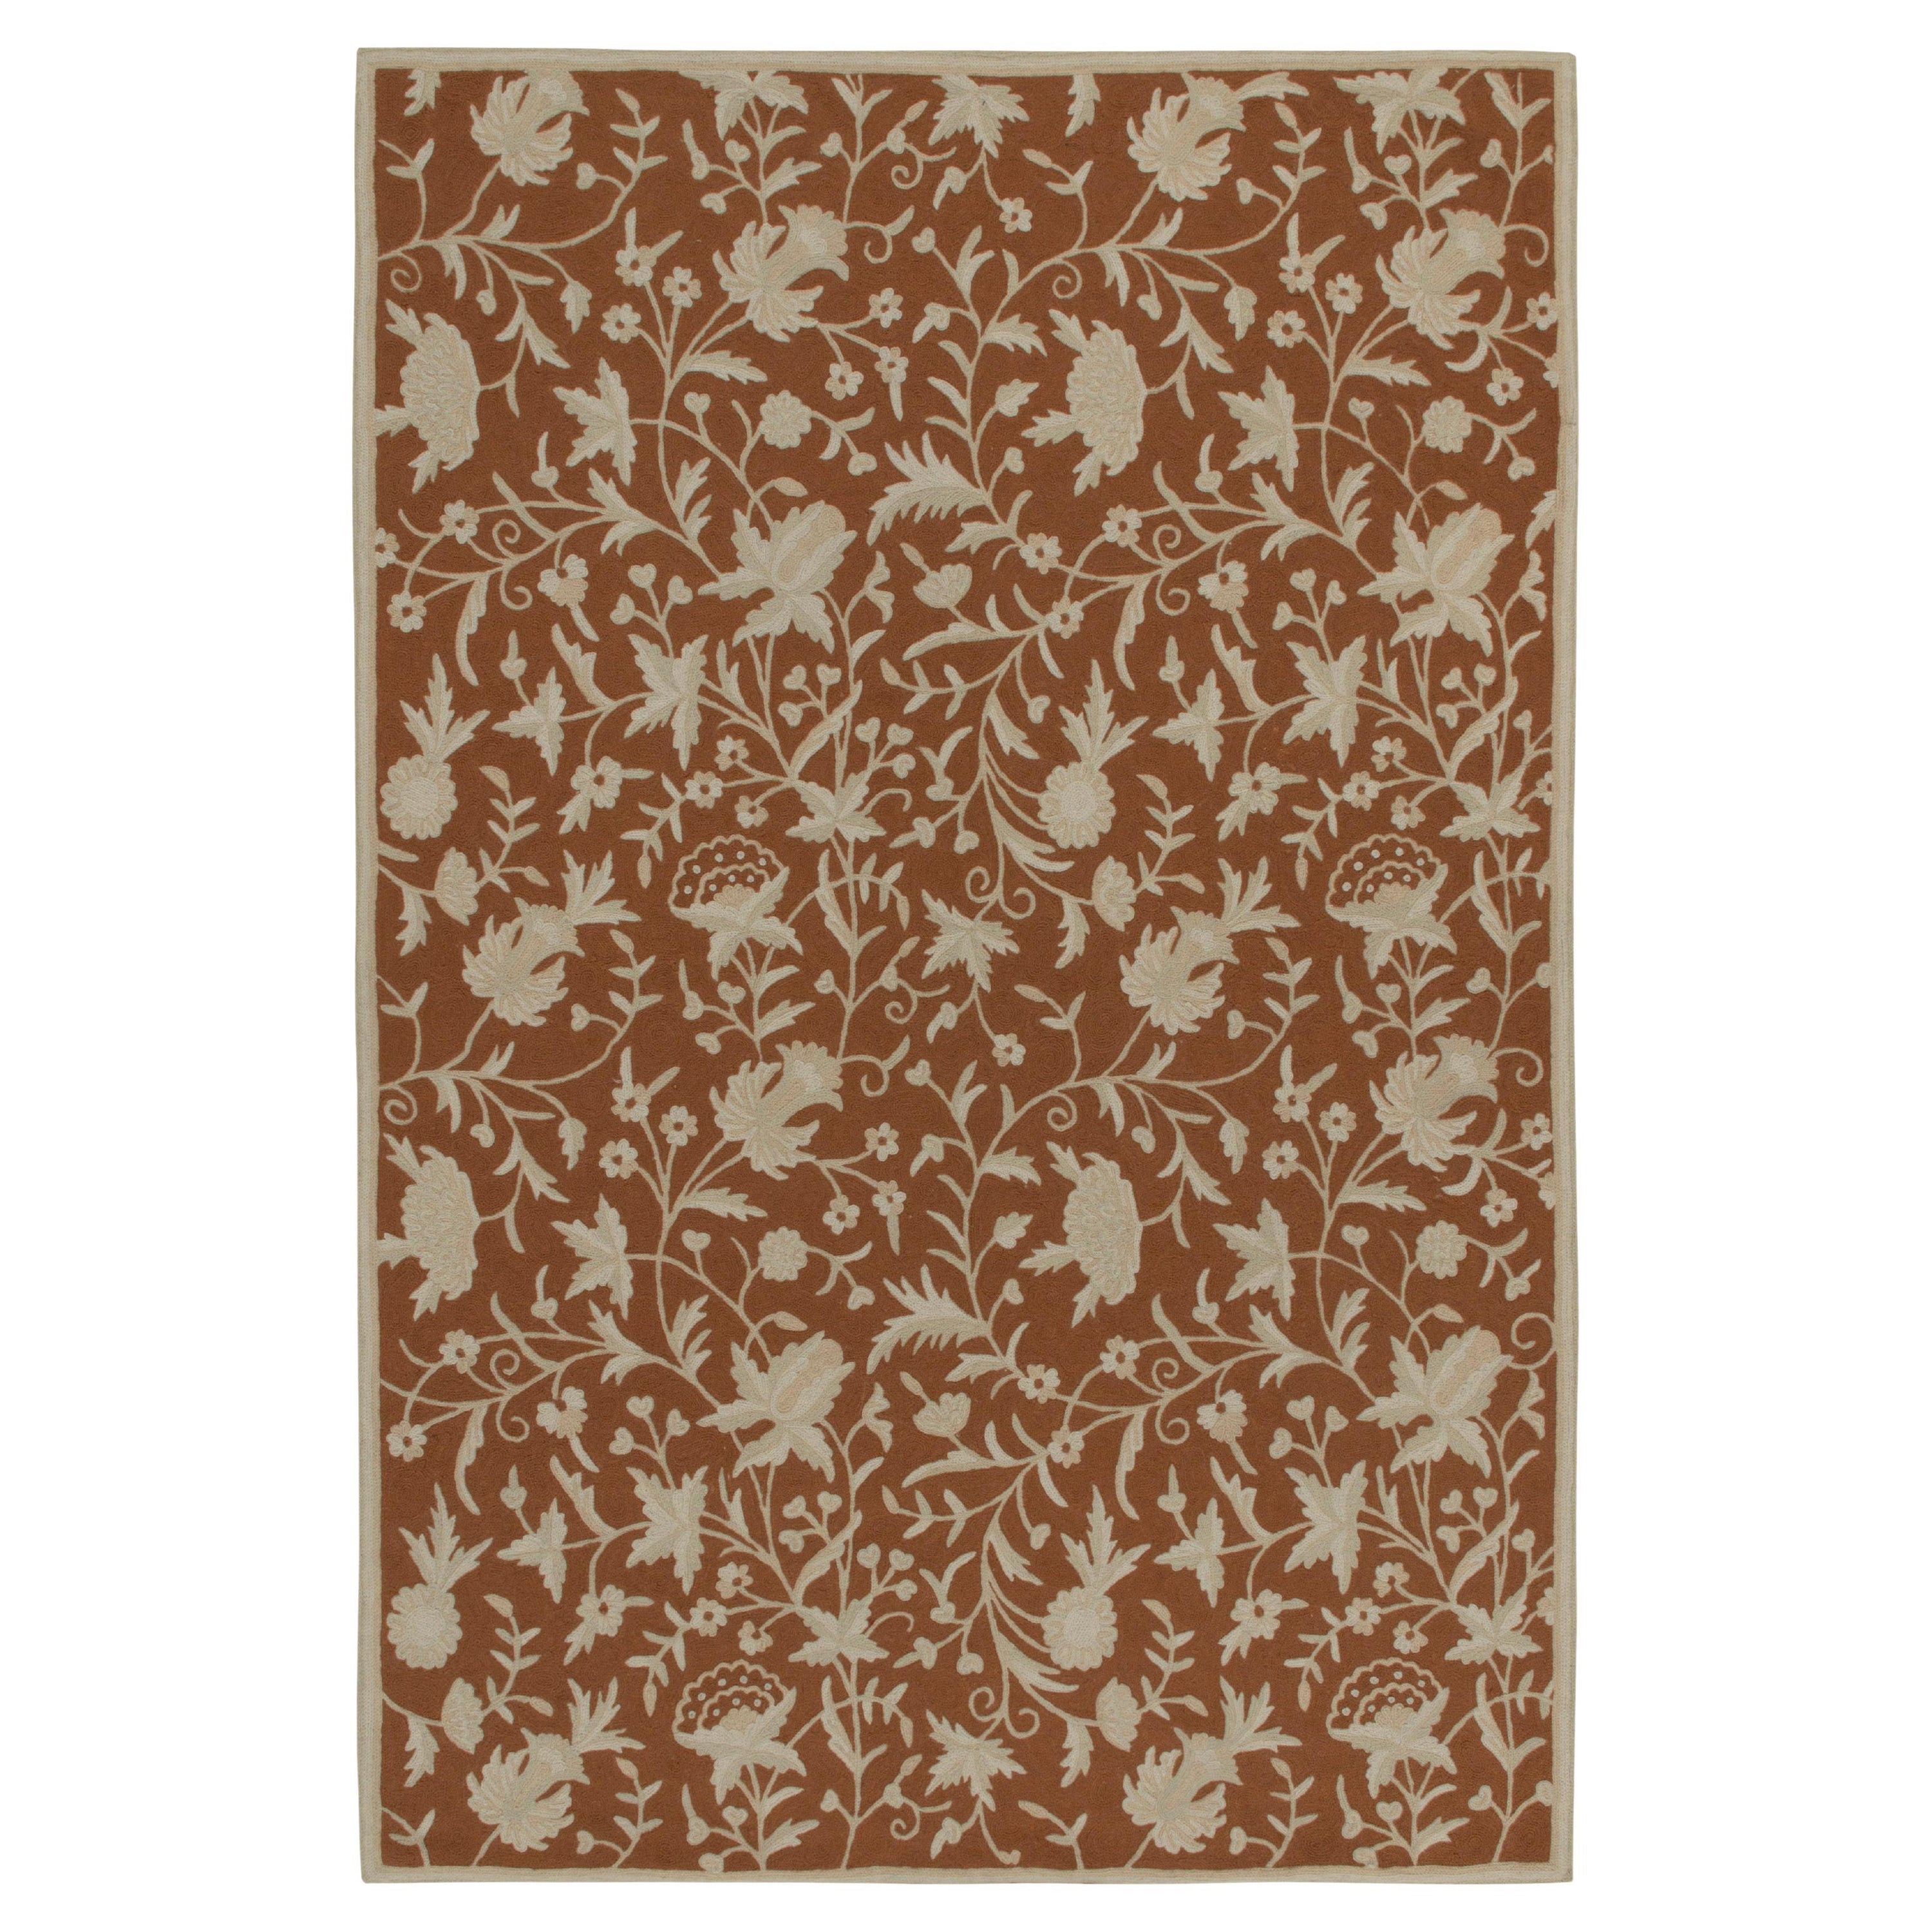 Rug & Kilim’s Contemporary Flat Weave in Brown with Beige Floral Patterns For Sale